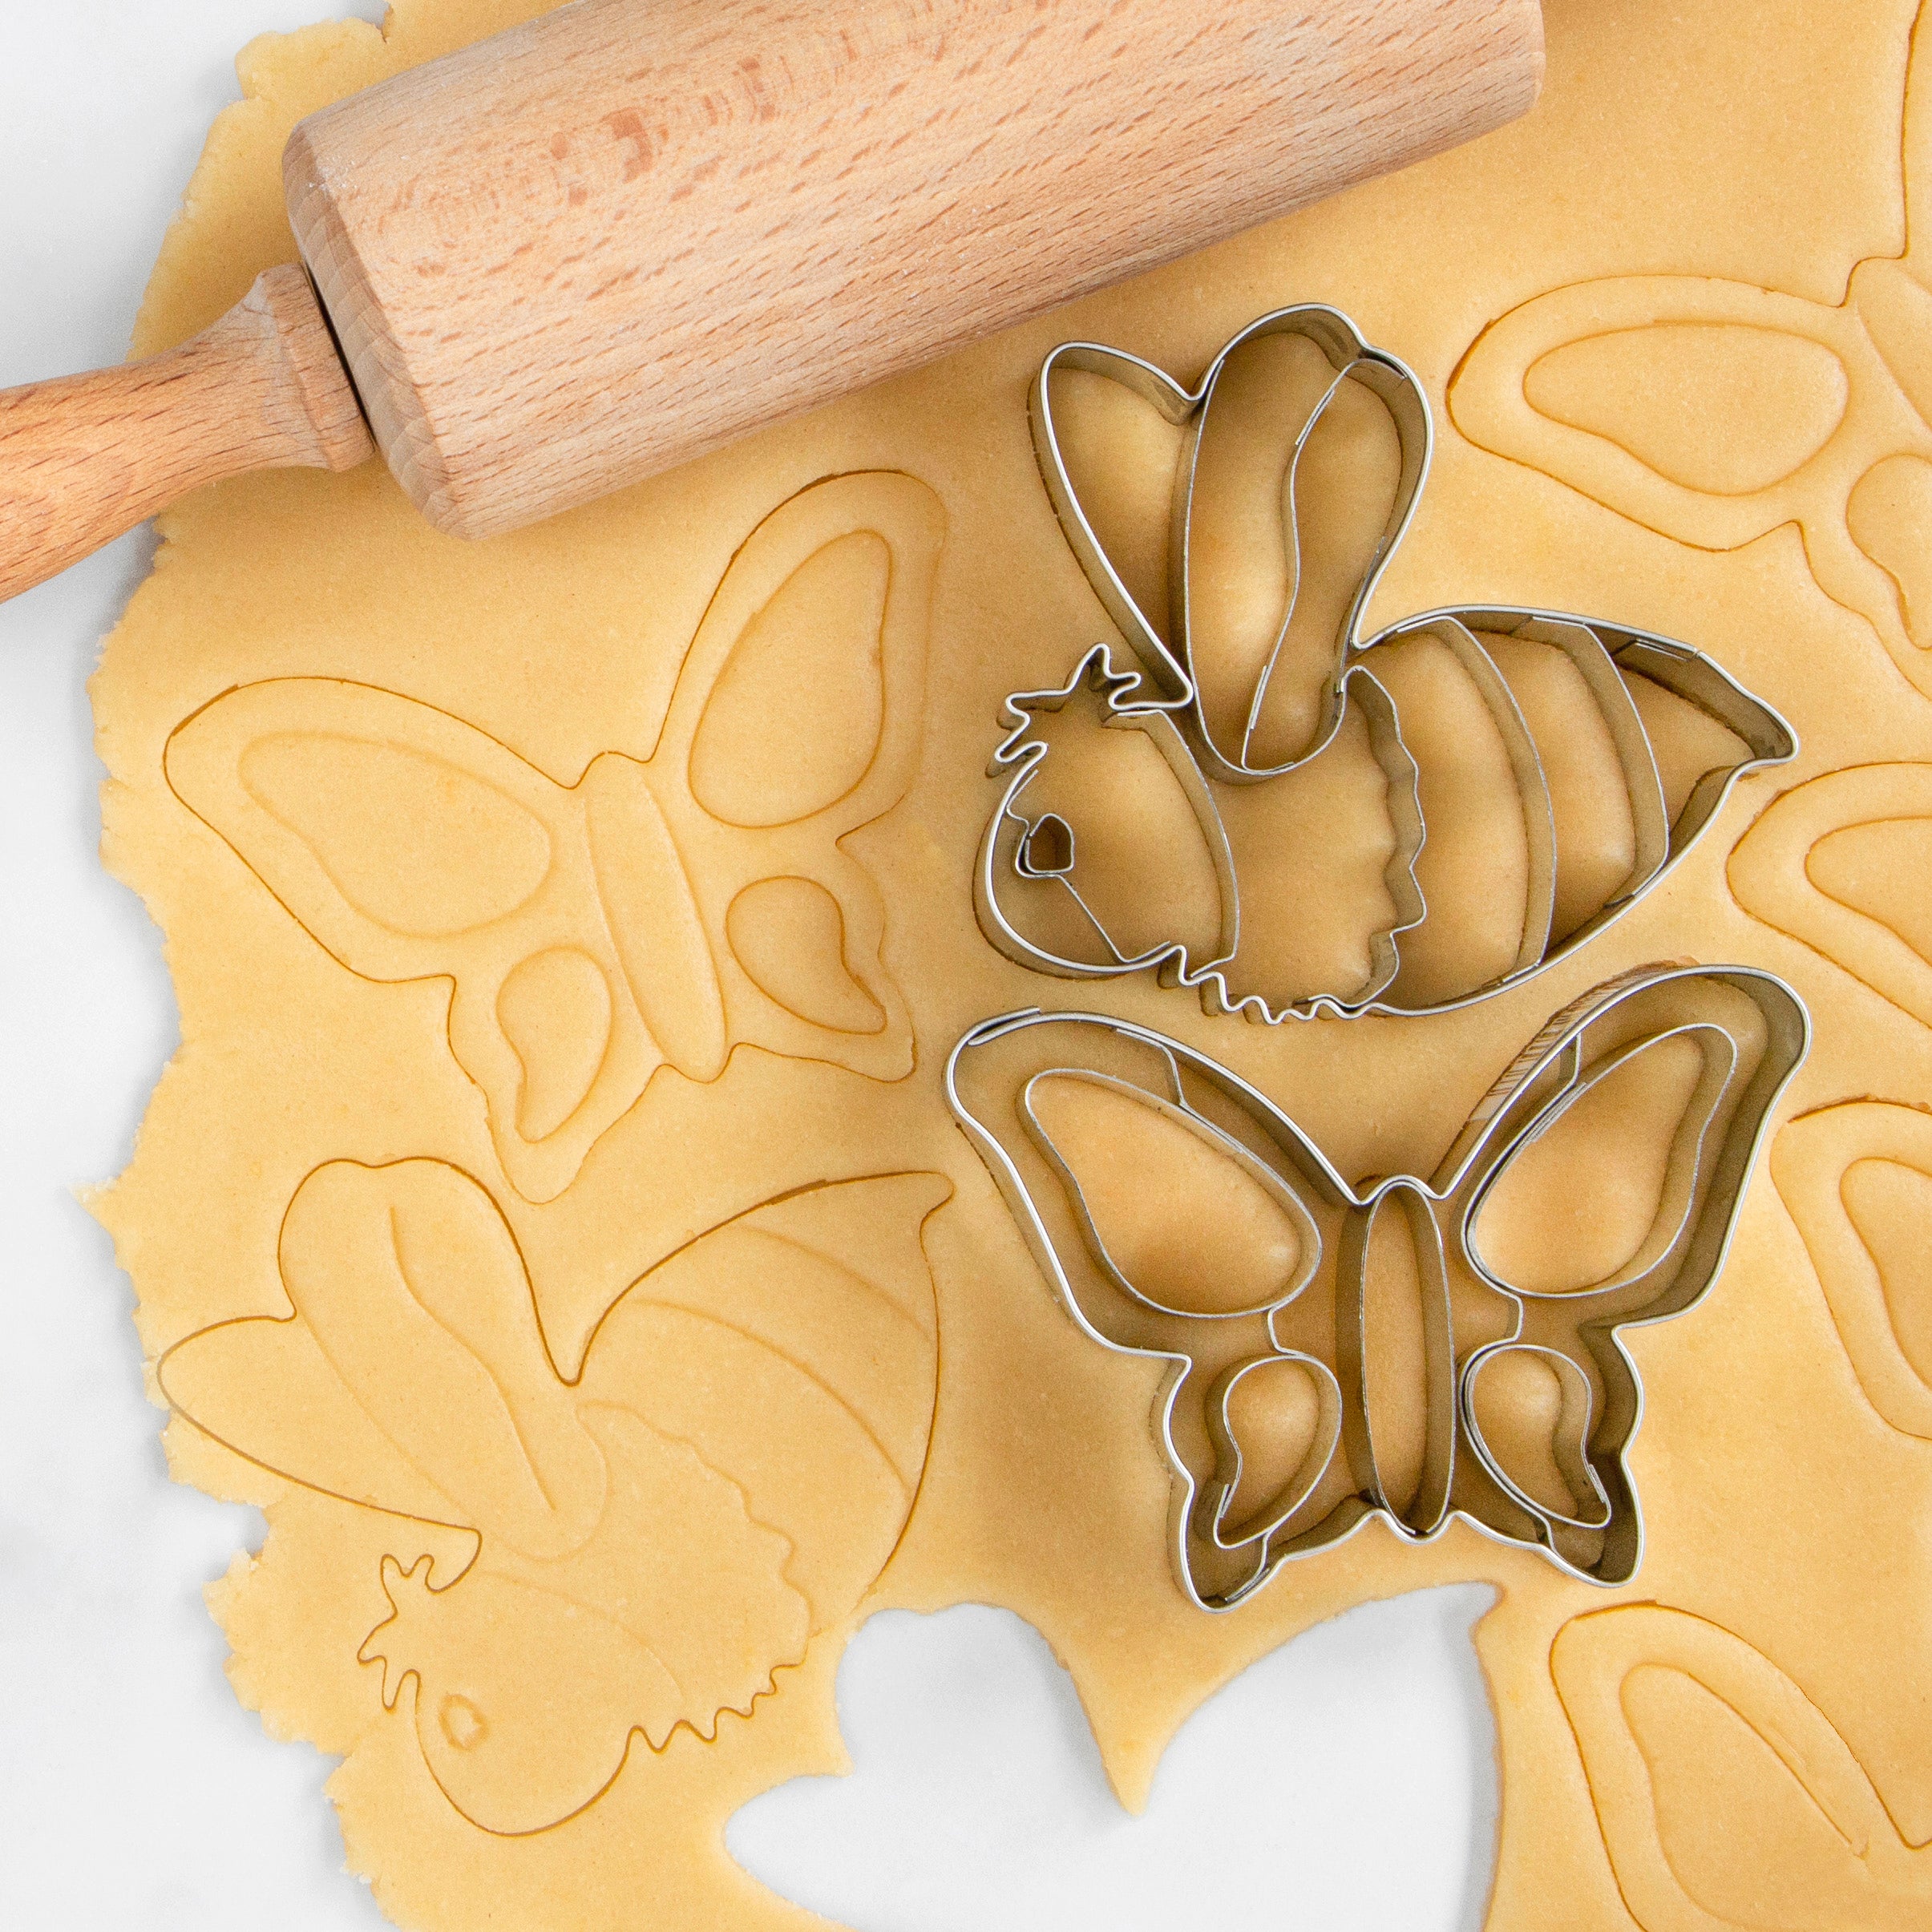 STÄDTER Insect for flower embossing cookie cutter